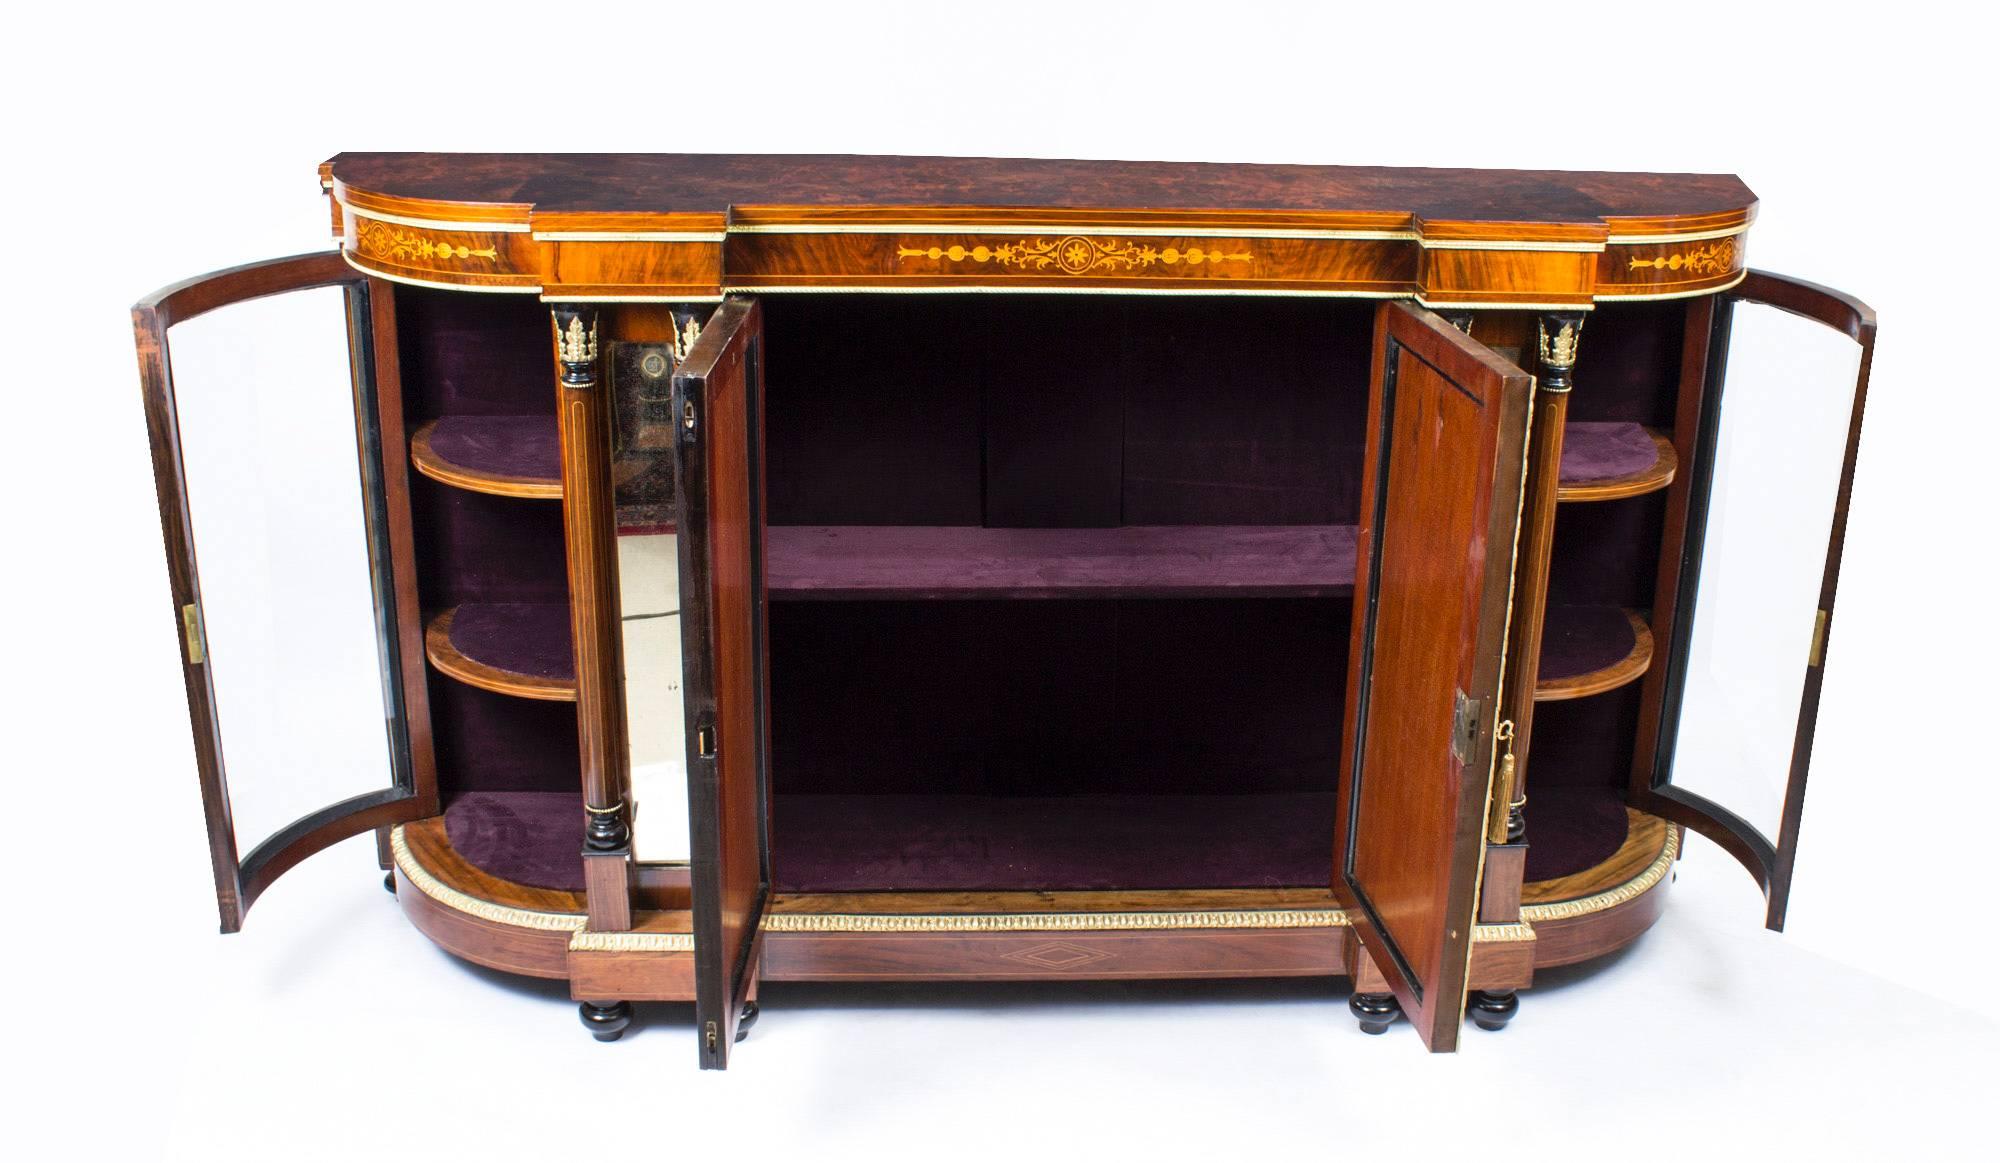 This is a superb antique Victorian burr walnut and inlaid credenza, circa 1880 in date.

The entire piece highlights the unique and truly exceptional pattern of the burr walnut extremely well and the walnut is complimented by the elegant inlaid